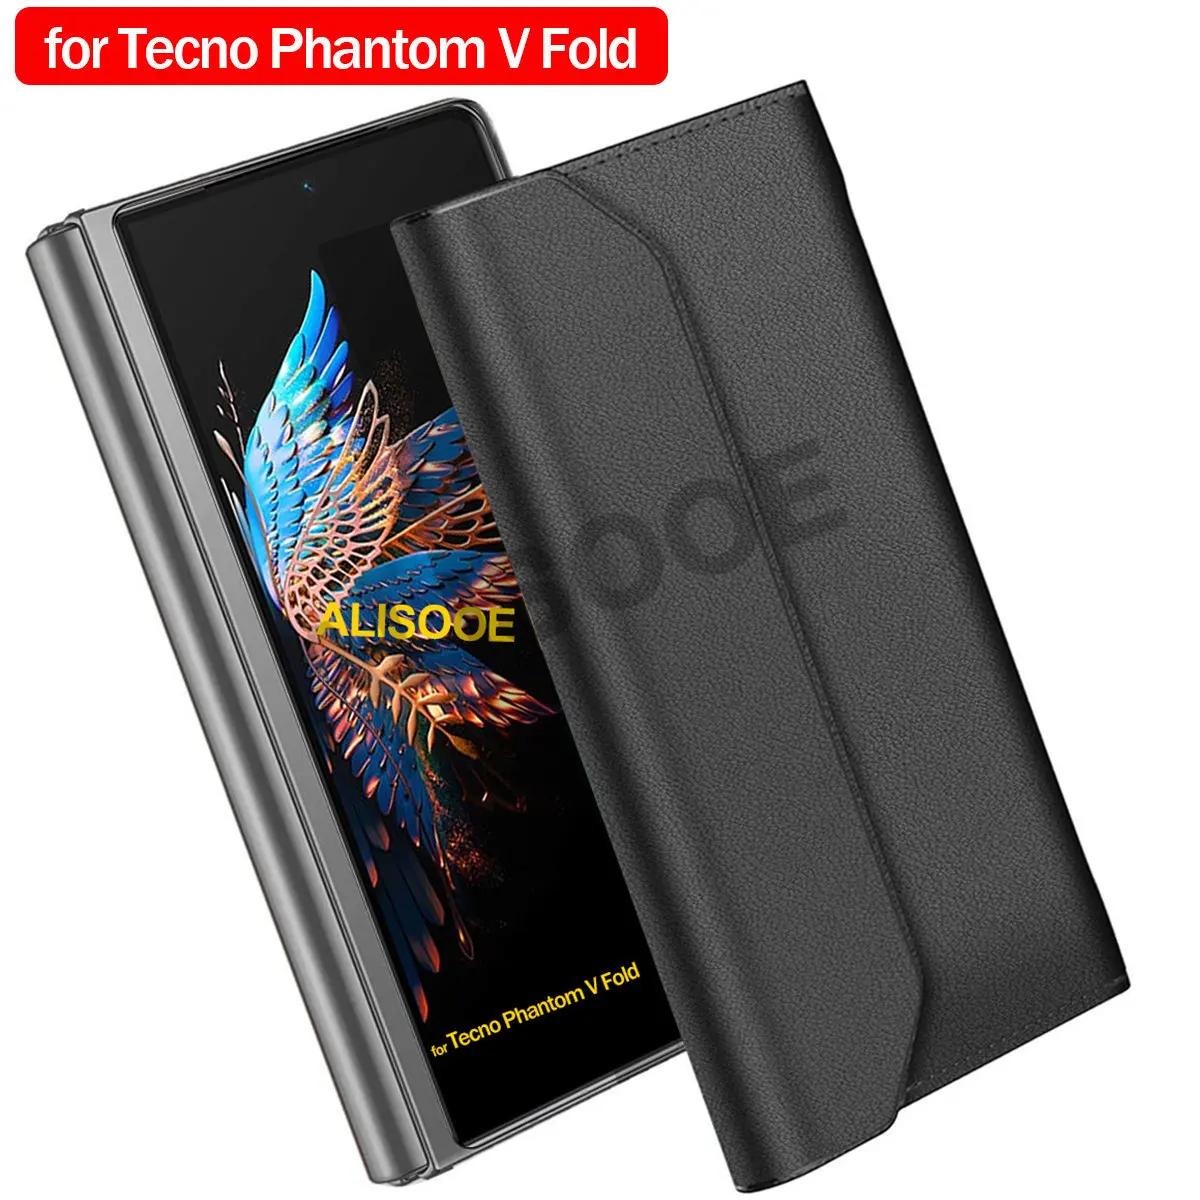 Genuine Leather Wallet Protection Cases For Tecno Phantom V Fold Case Cowhide Sleeve Folding Pouch Bag Fundas Capa